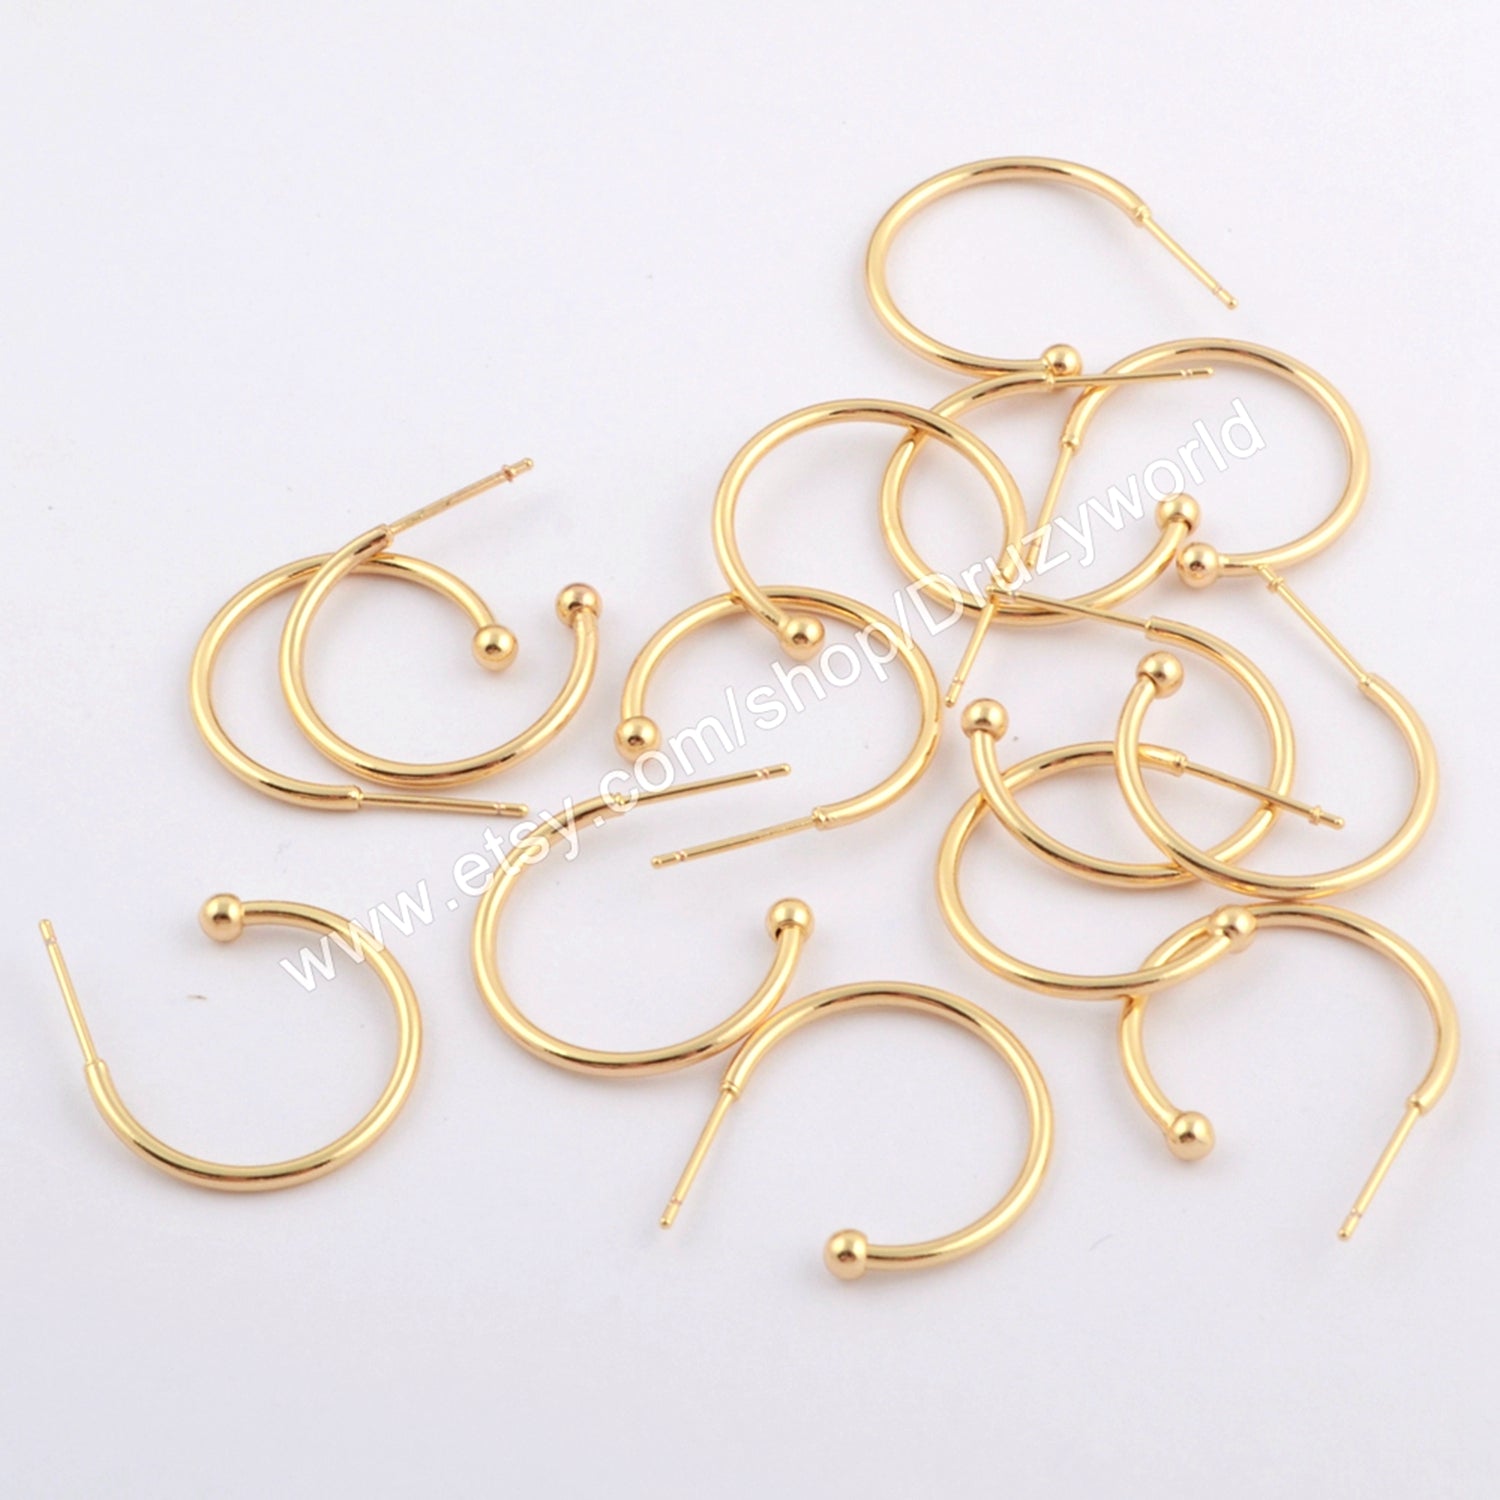 50 Pcs Fashion Gold Plated Brass Round Earring Findings 20mm Simple Circle Ear Wires Hooks Posts Tools DIY Making Jewelry Supply PJ388